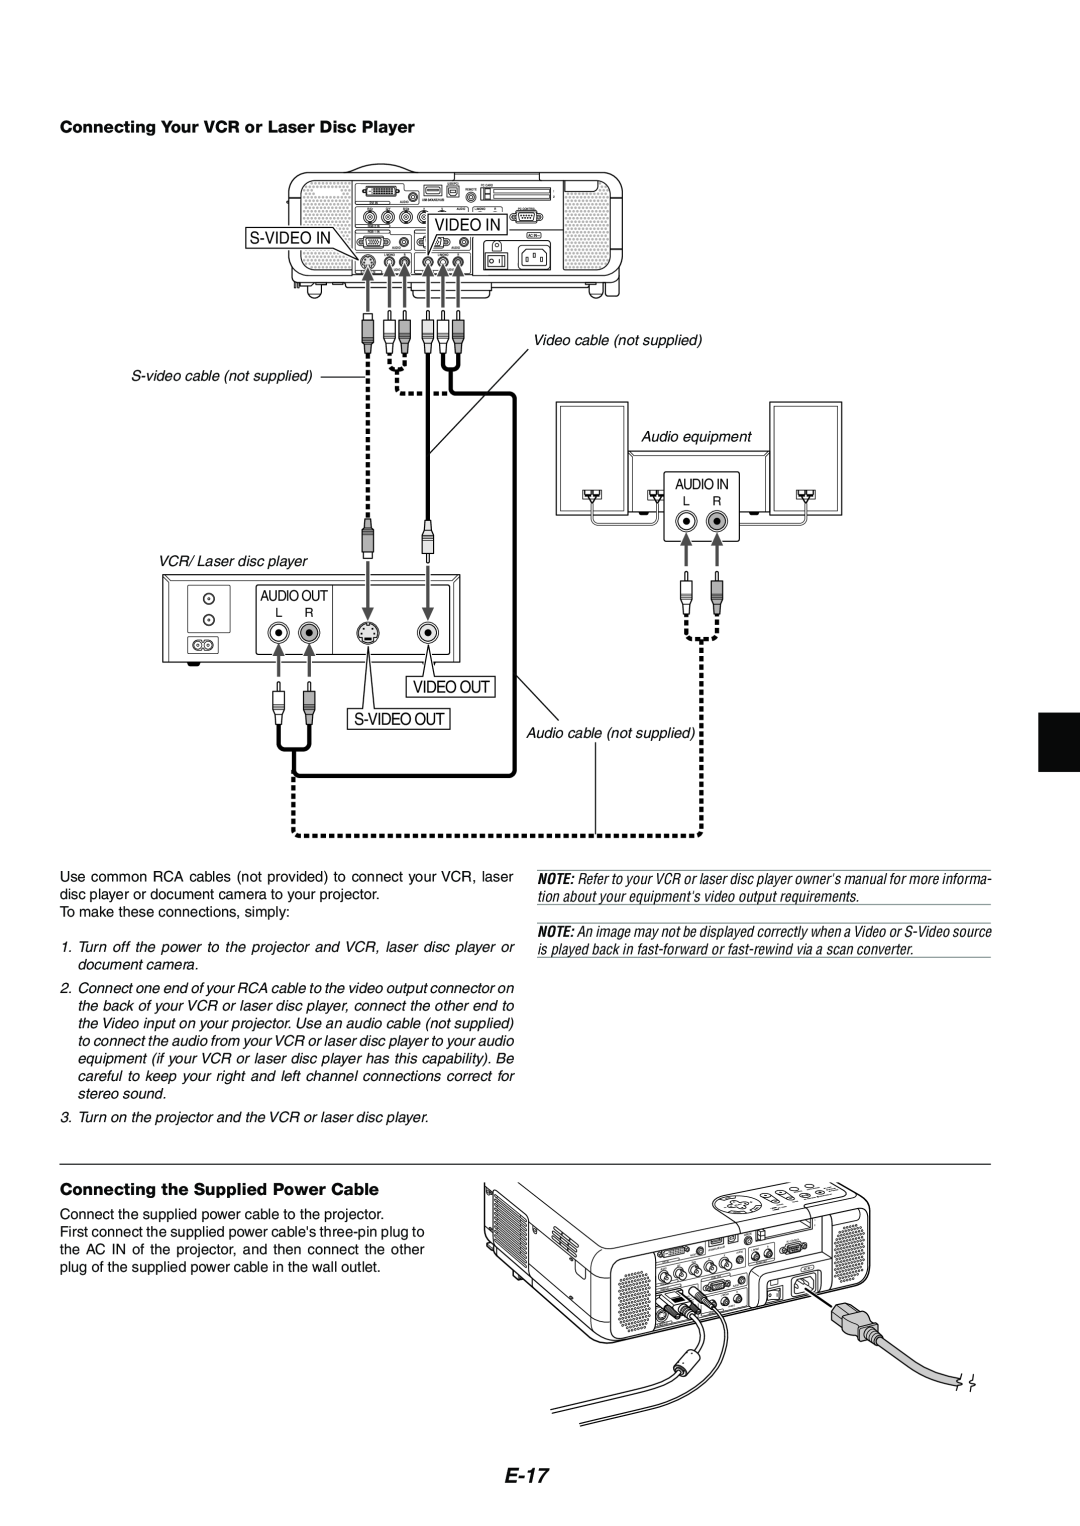 Kensington MT1065, MT1075 user manual E-17, Connecting Your VCR or Laser Disc Player, Connecting the Supplied Power Cable 